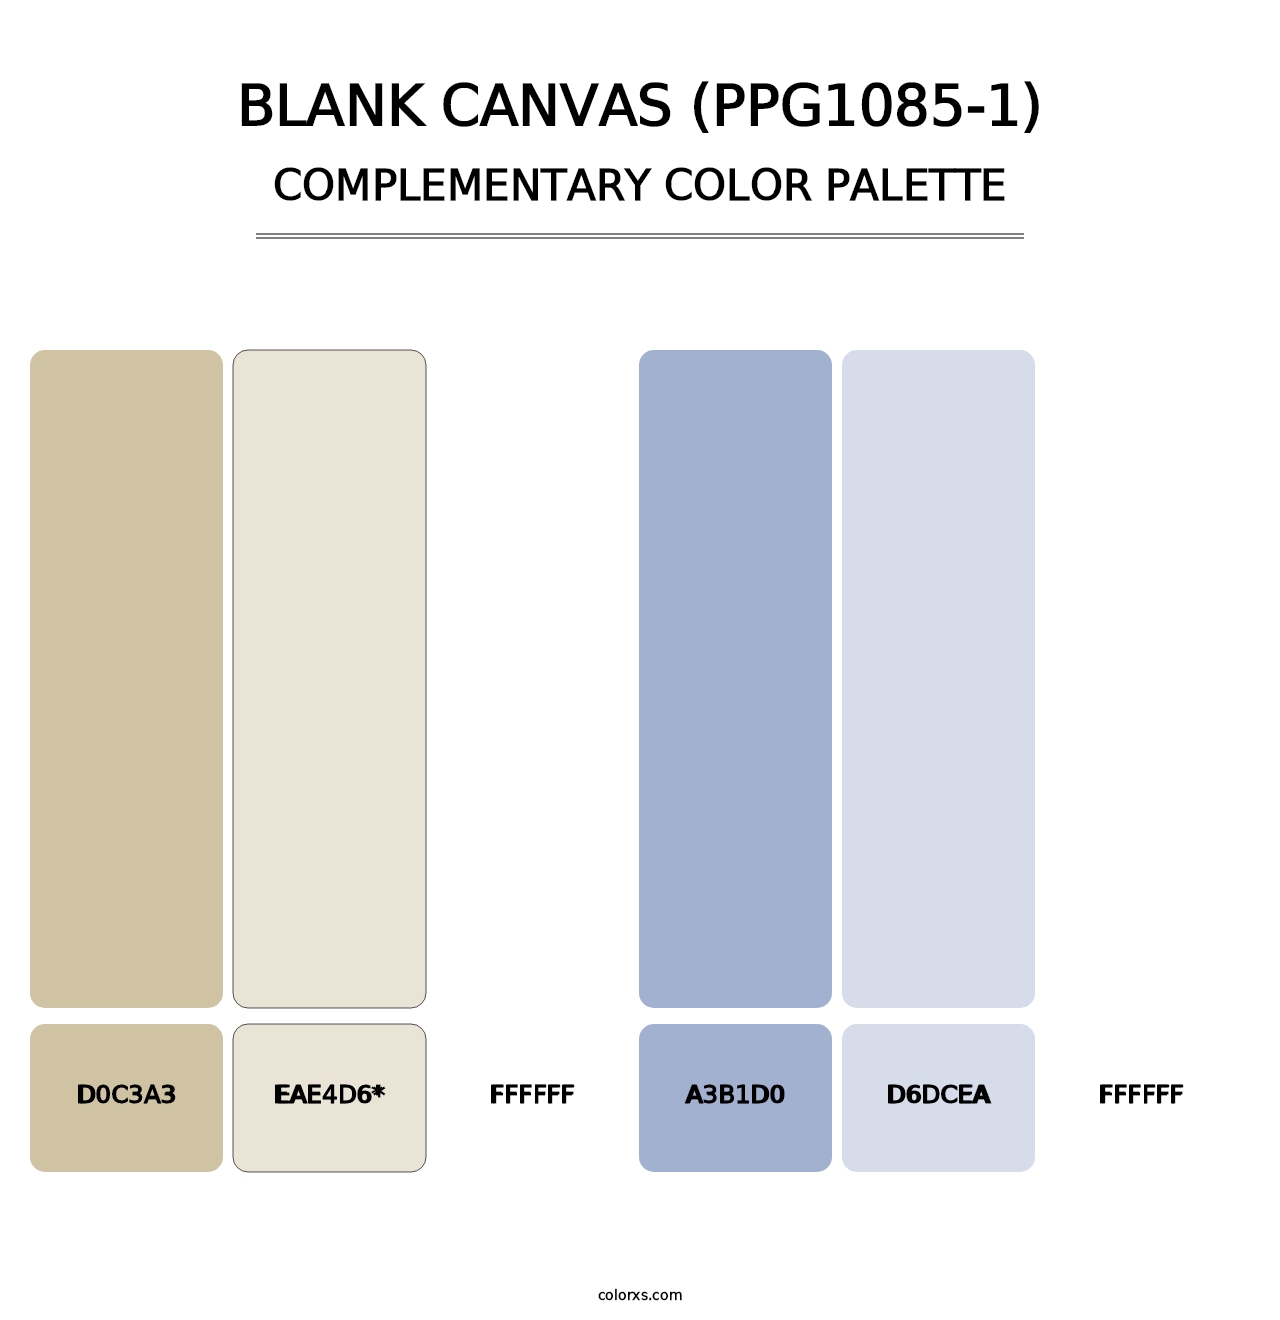 Blank Canvas (PPG1085-1) - Complementary Color Palette